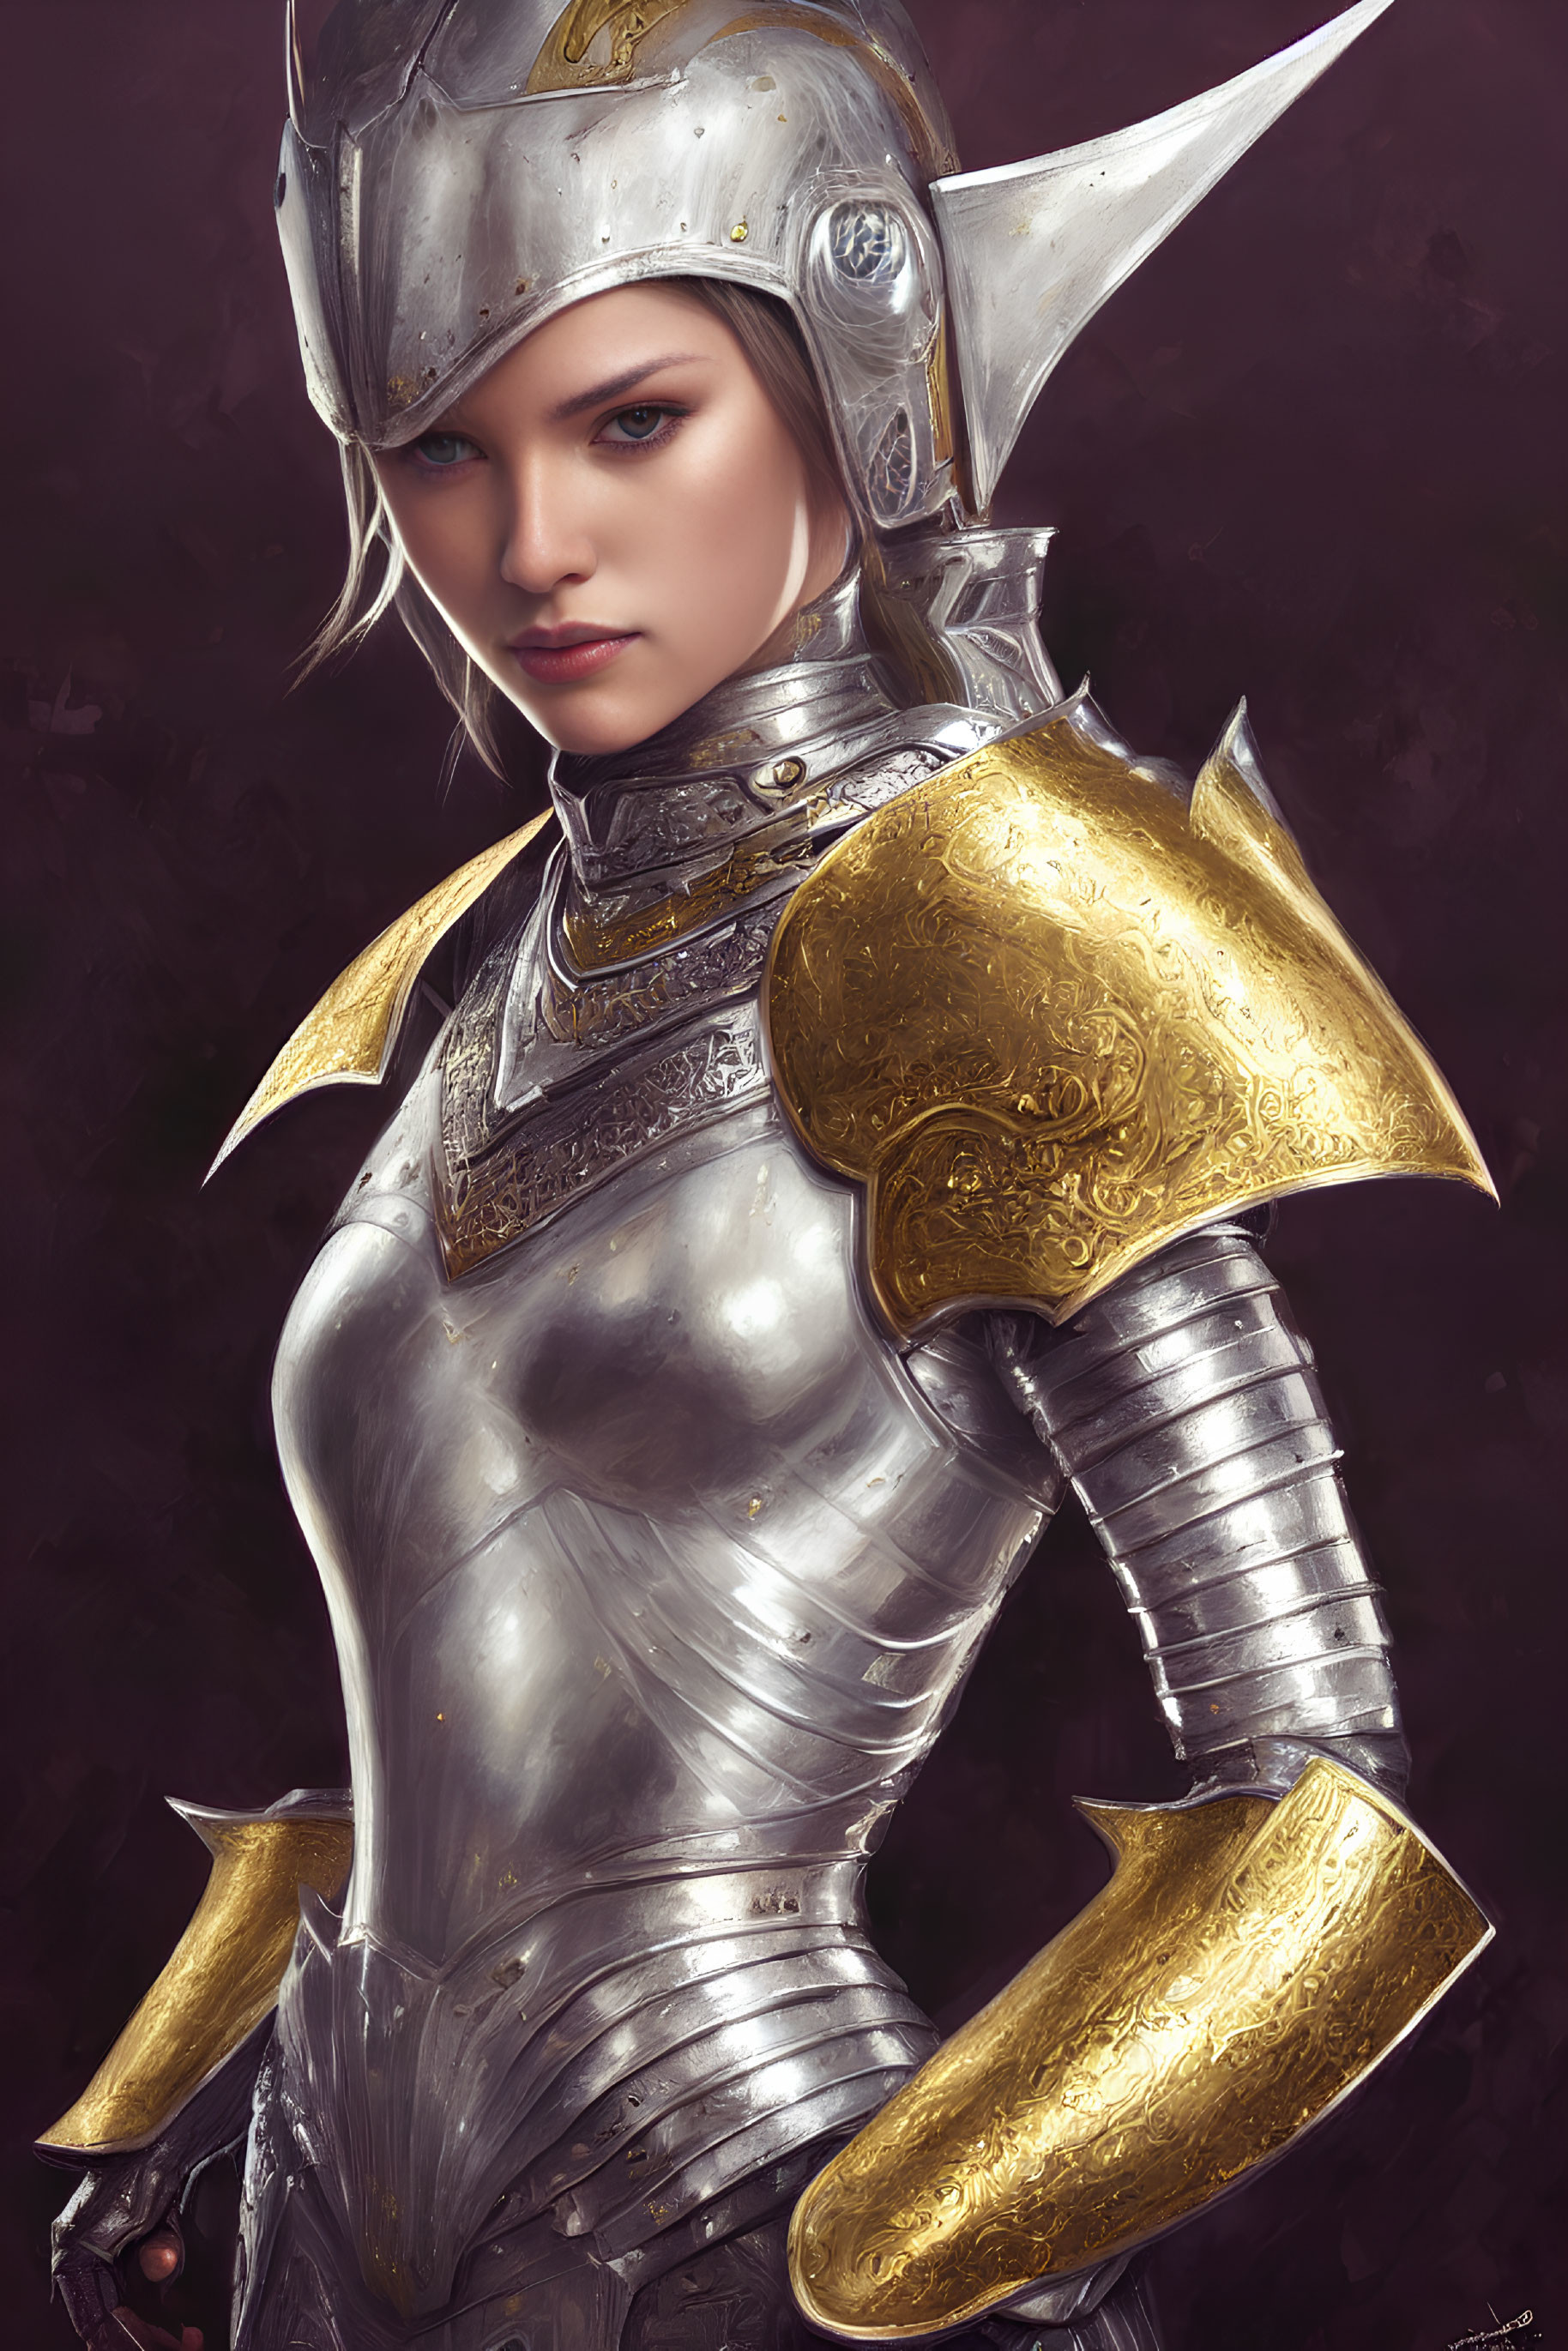 Female knight in silver and gold armor with helmet and determined expression